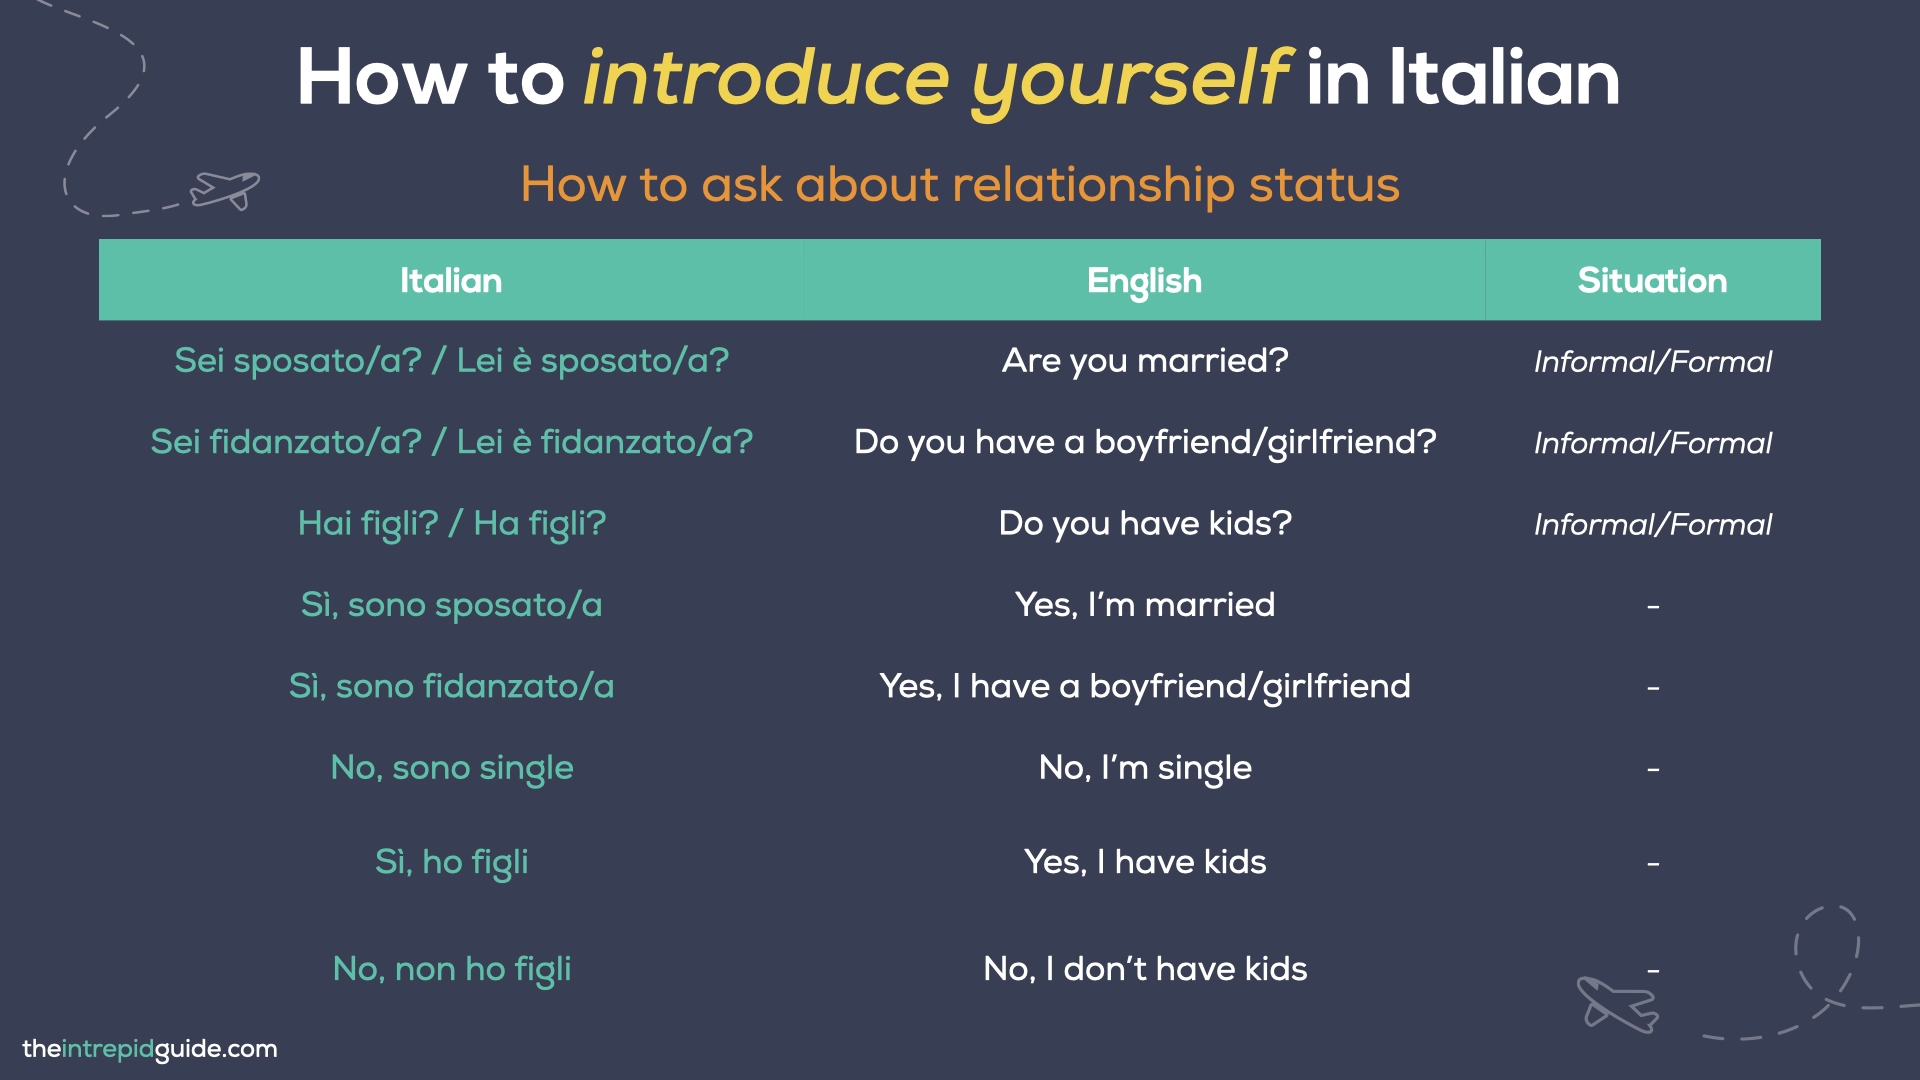 How to introduce yourself in Italian - How to ask about relationship status